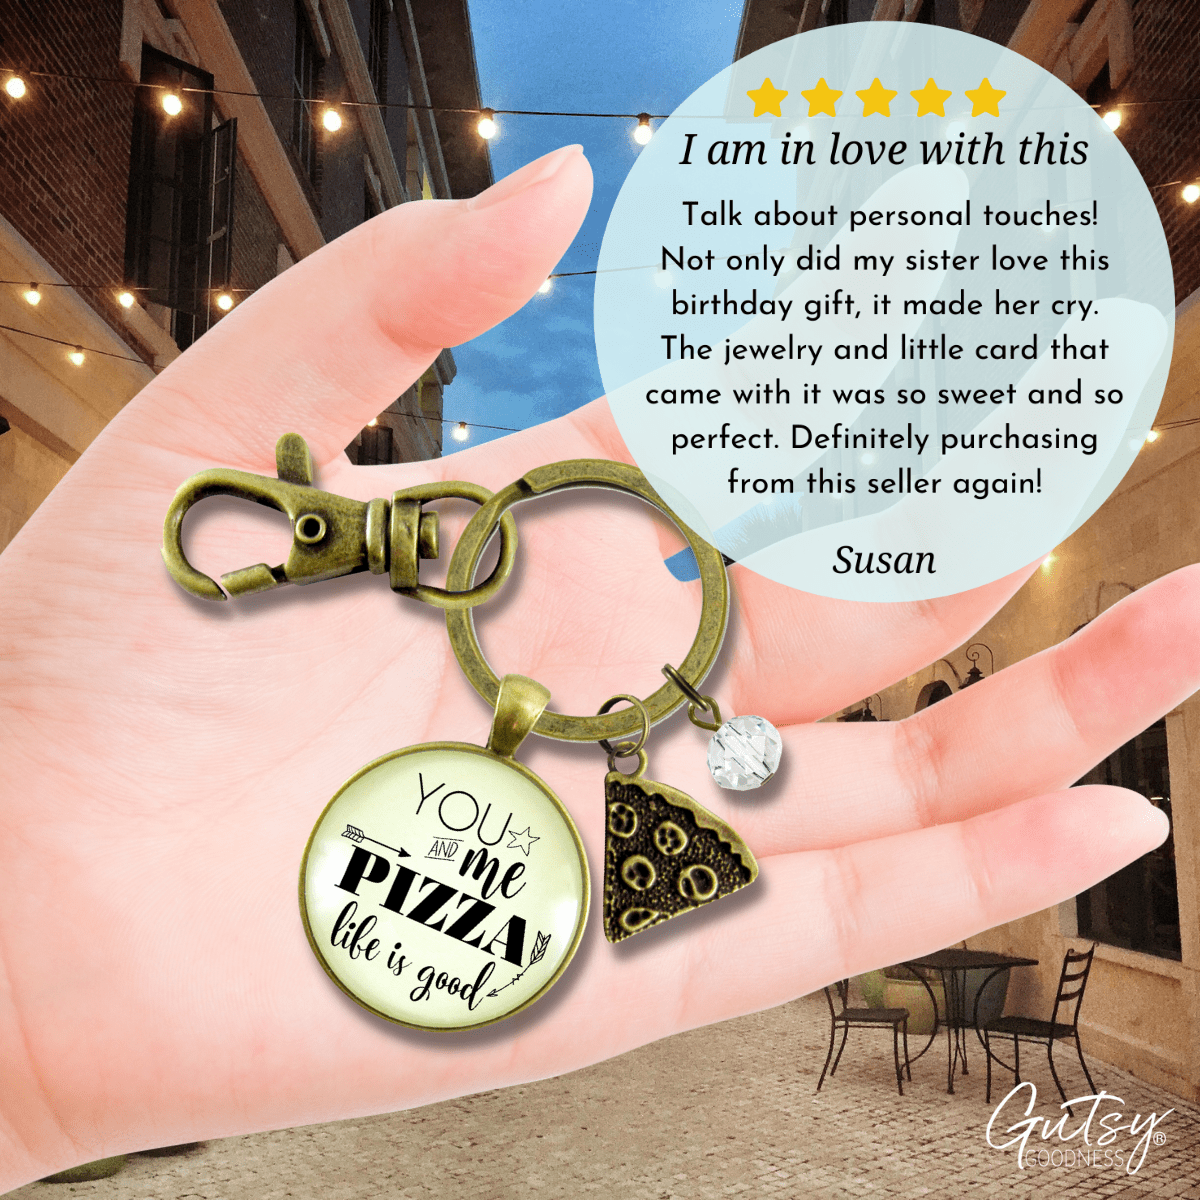 Pizza Keychains Set of 2 You Me Pizza Life Is Good Unisex Friendship Food Theme BFF Jewelry Slice - Gutsy Goodness